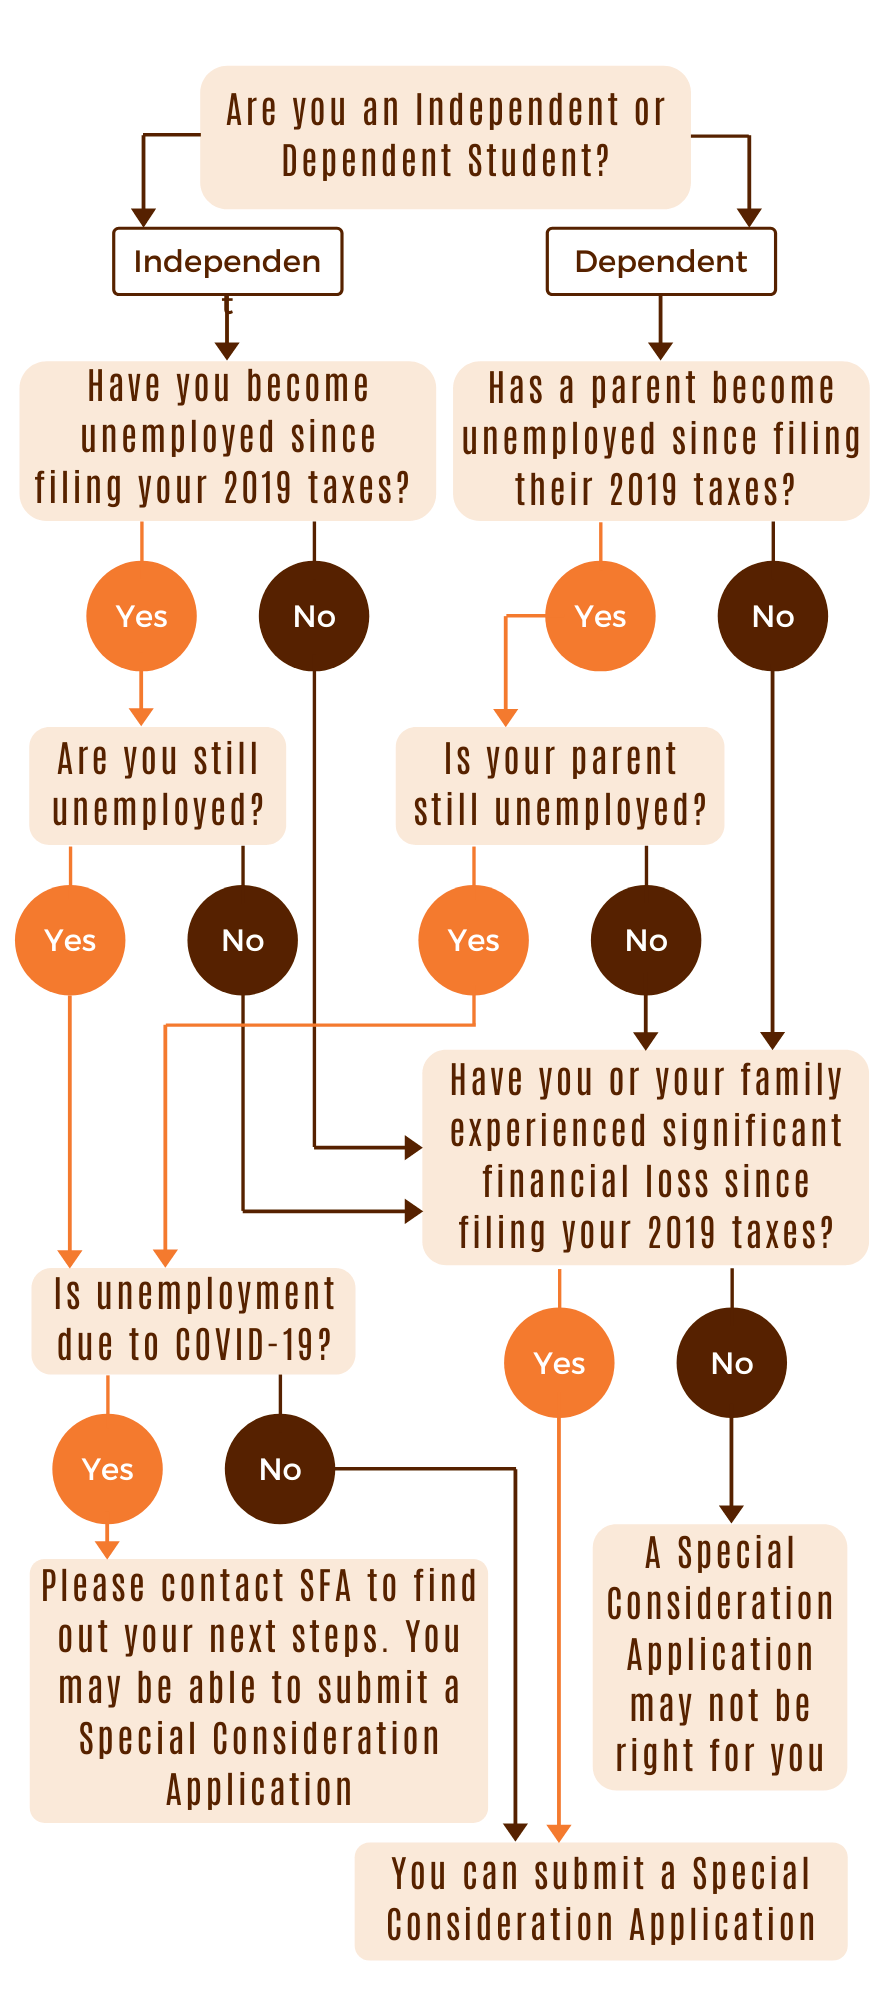 This flow chart can be used as a tool to help you understand if a Special Consideration Application is right for you and your family.